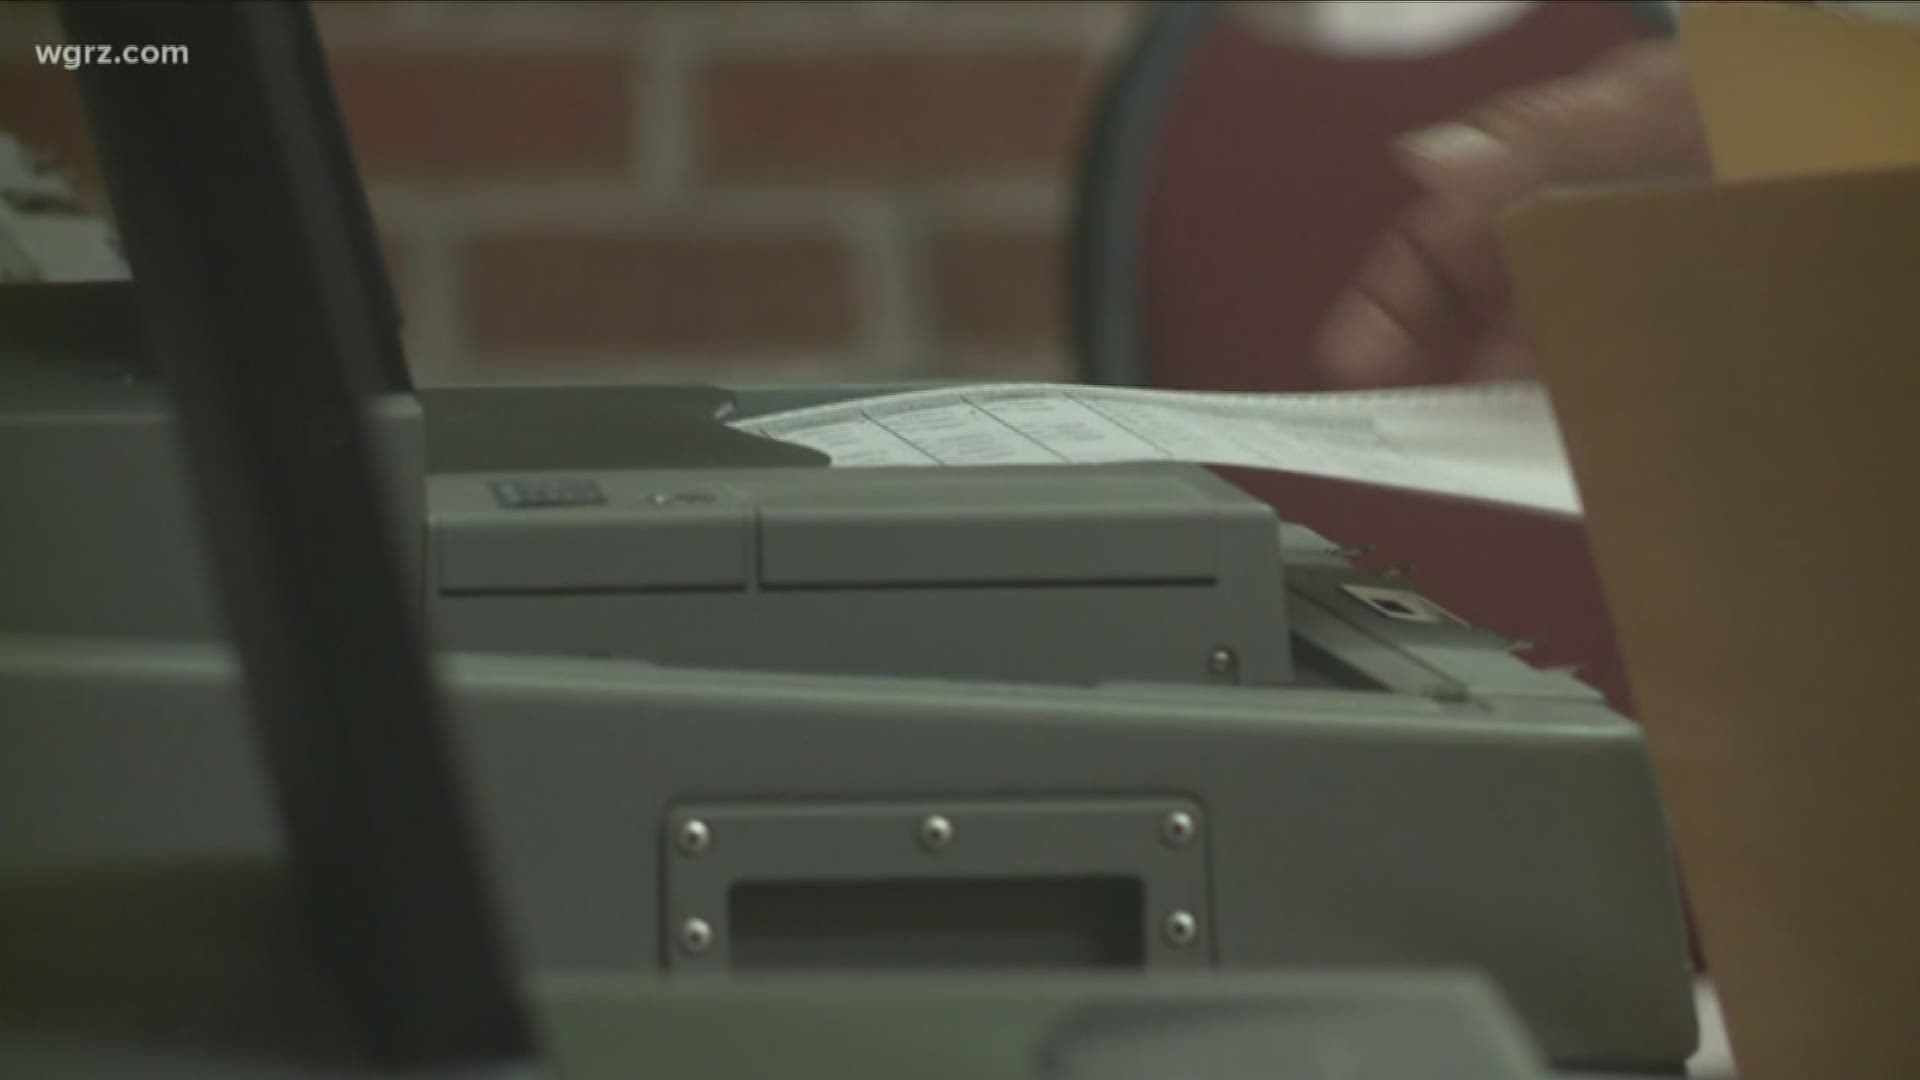 New York's adding early voting for the first time this coming election, and county leaders across the state are concerned that the money from Albany to help "pay" for it won't be there.